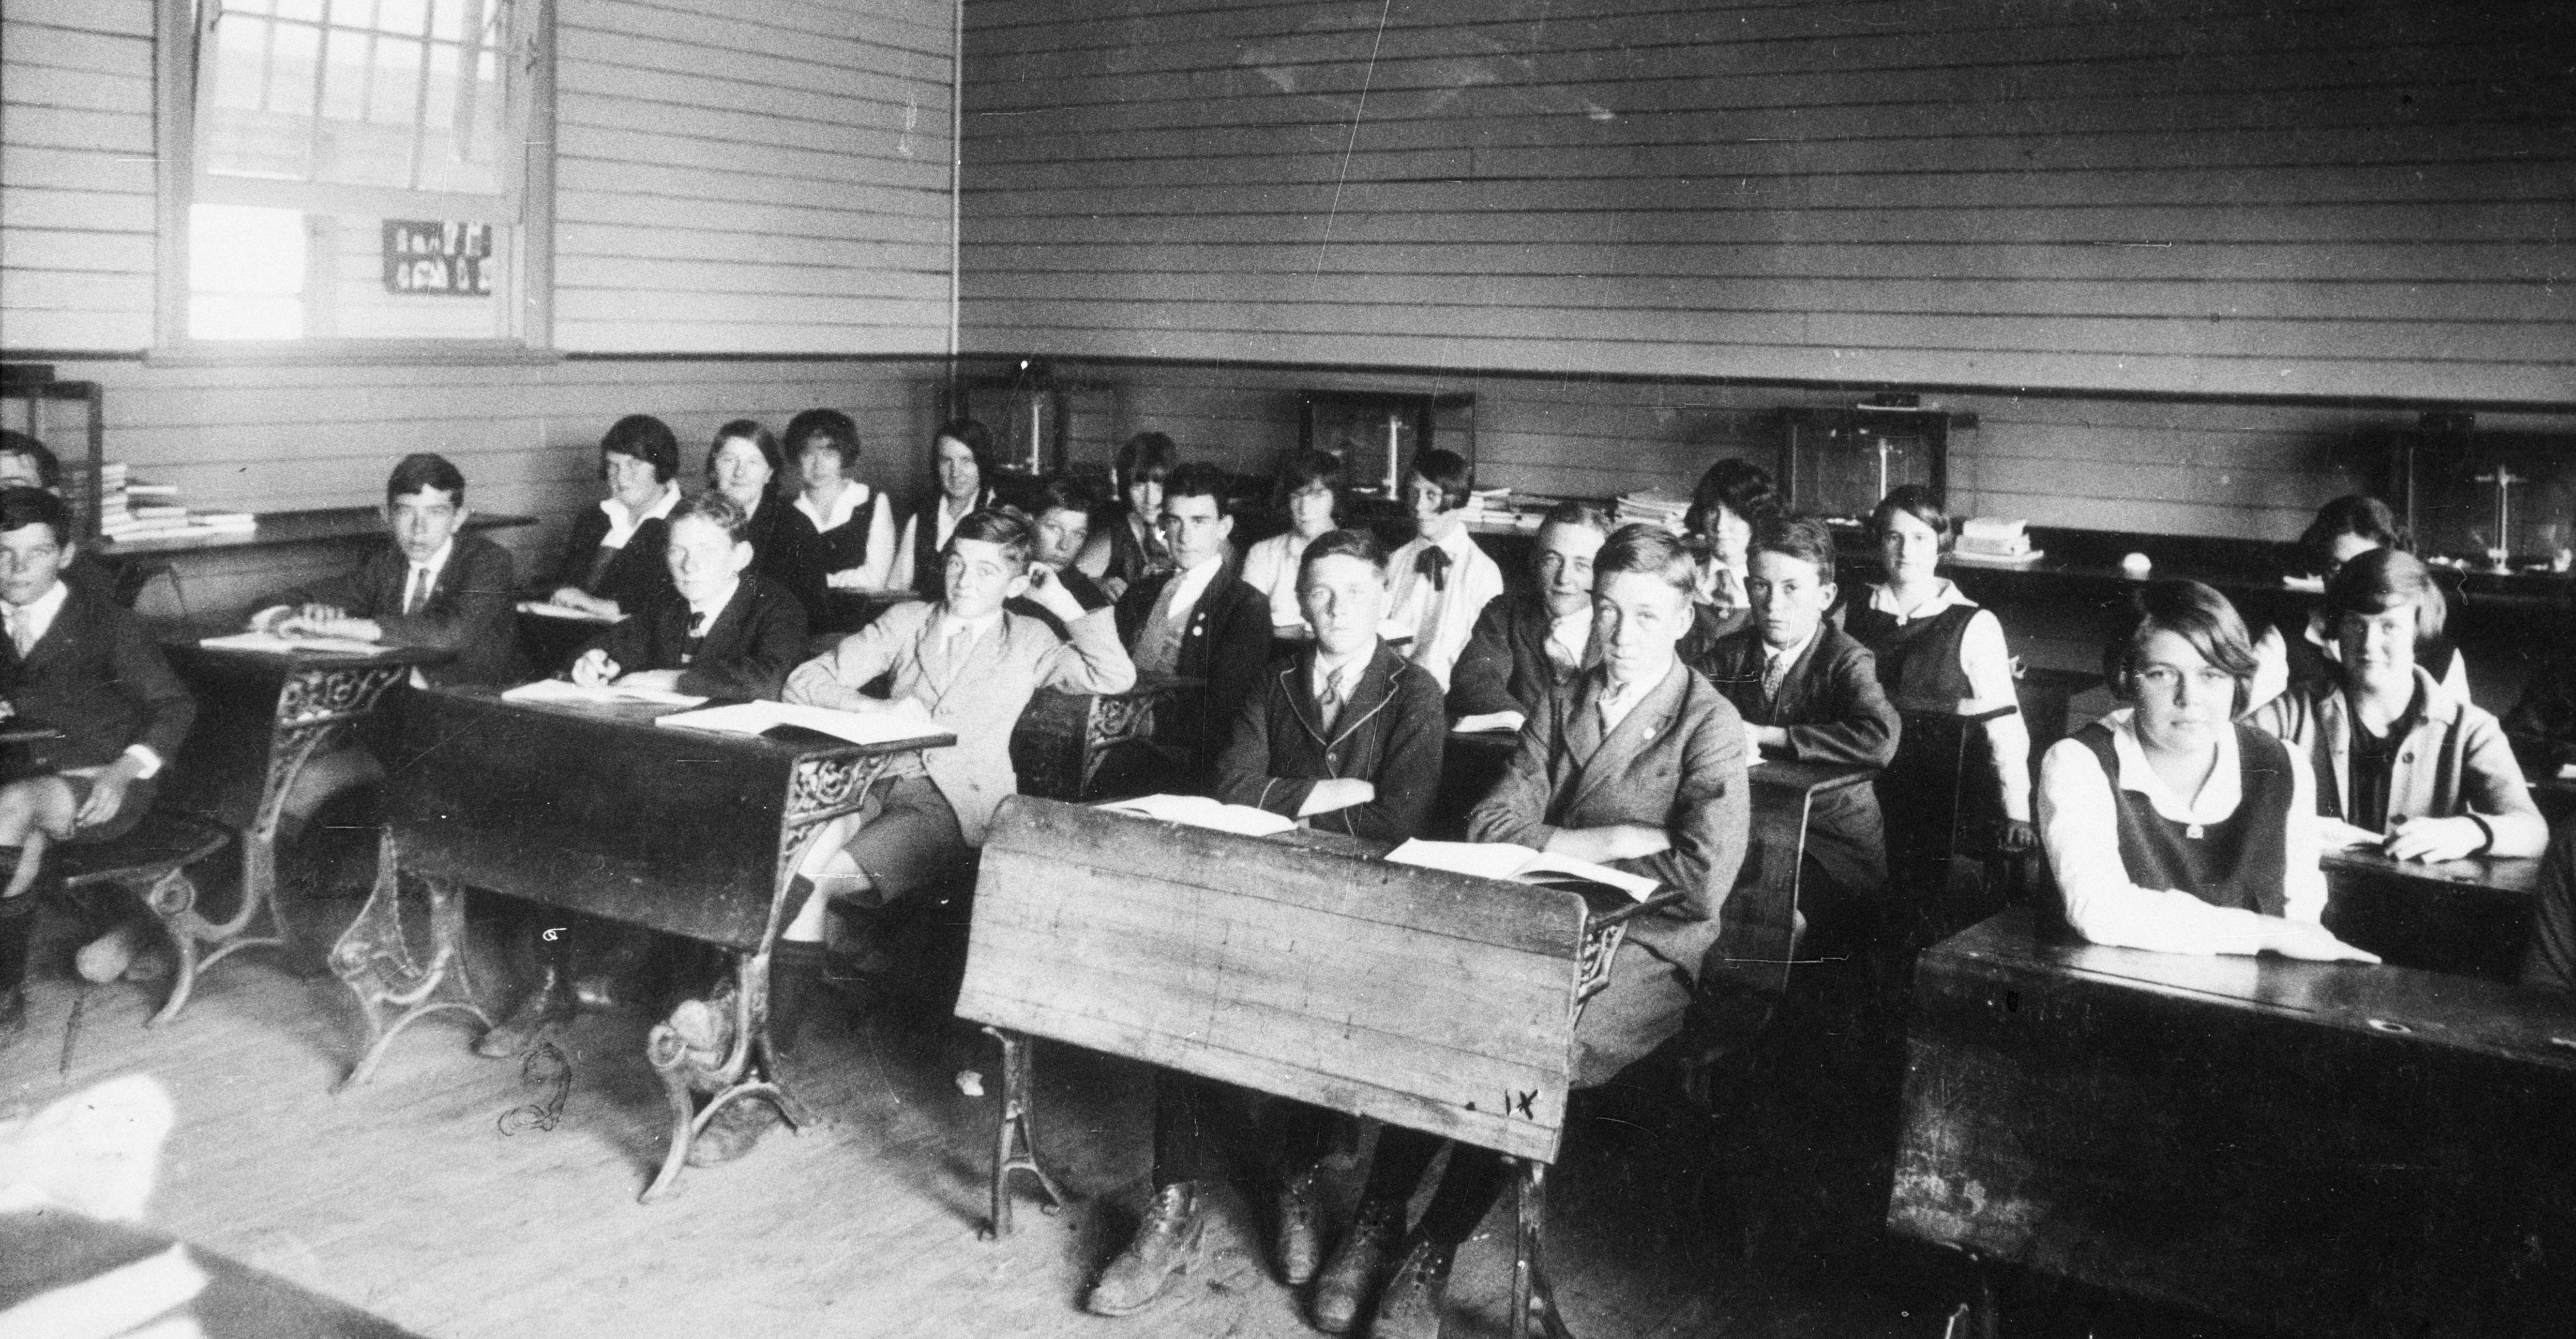 Adolescents coralled in classrooms, Deniliquen Intermediate High School, c 1935. State Library of New South Wales.